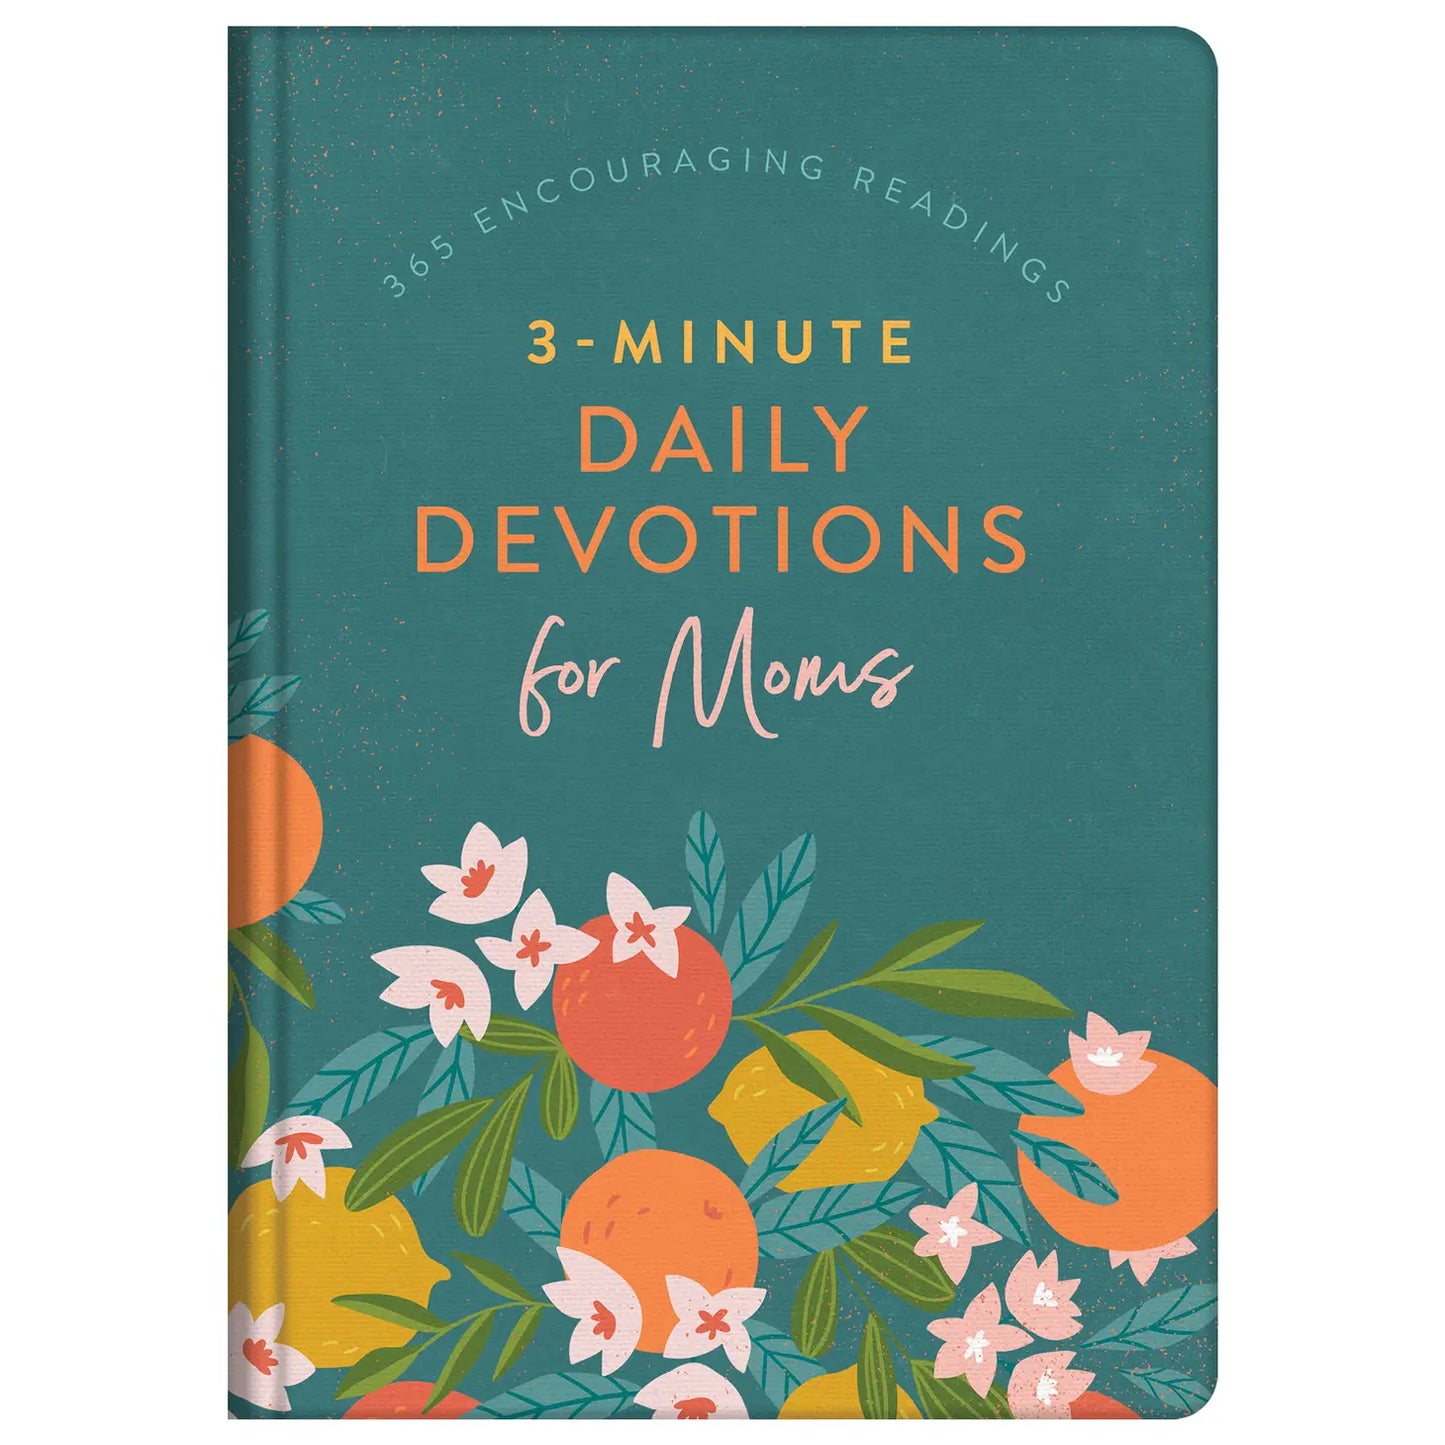 3-Minute Daily Devotions for Moms Book  - Doodlebug's Children's Boutique